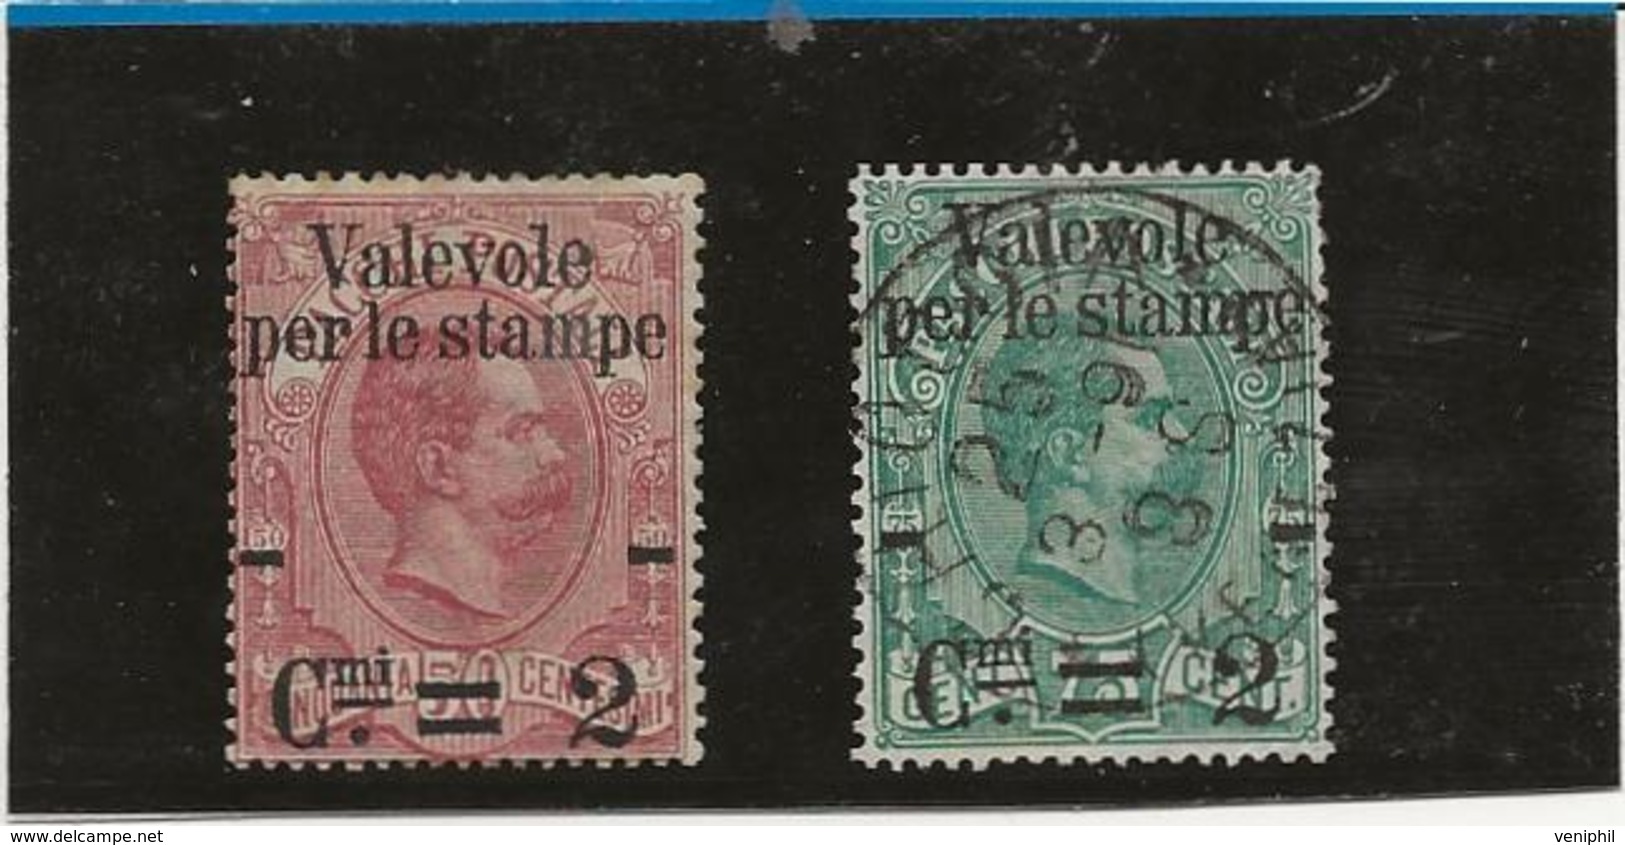 TIMBRES N° 48 NEUF S GOMME + N° 49 OBLITERE - ANNEE 1890 - COTE : 40 € - Gebraucht